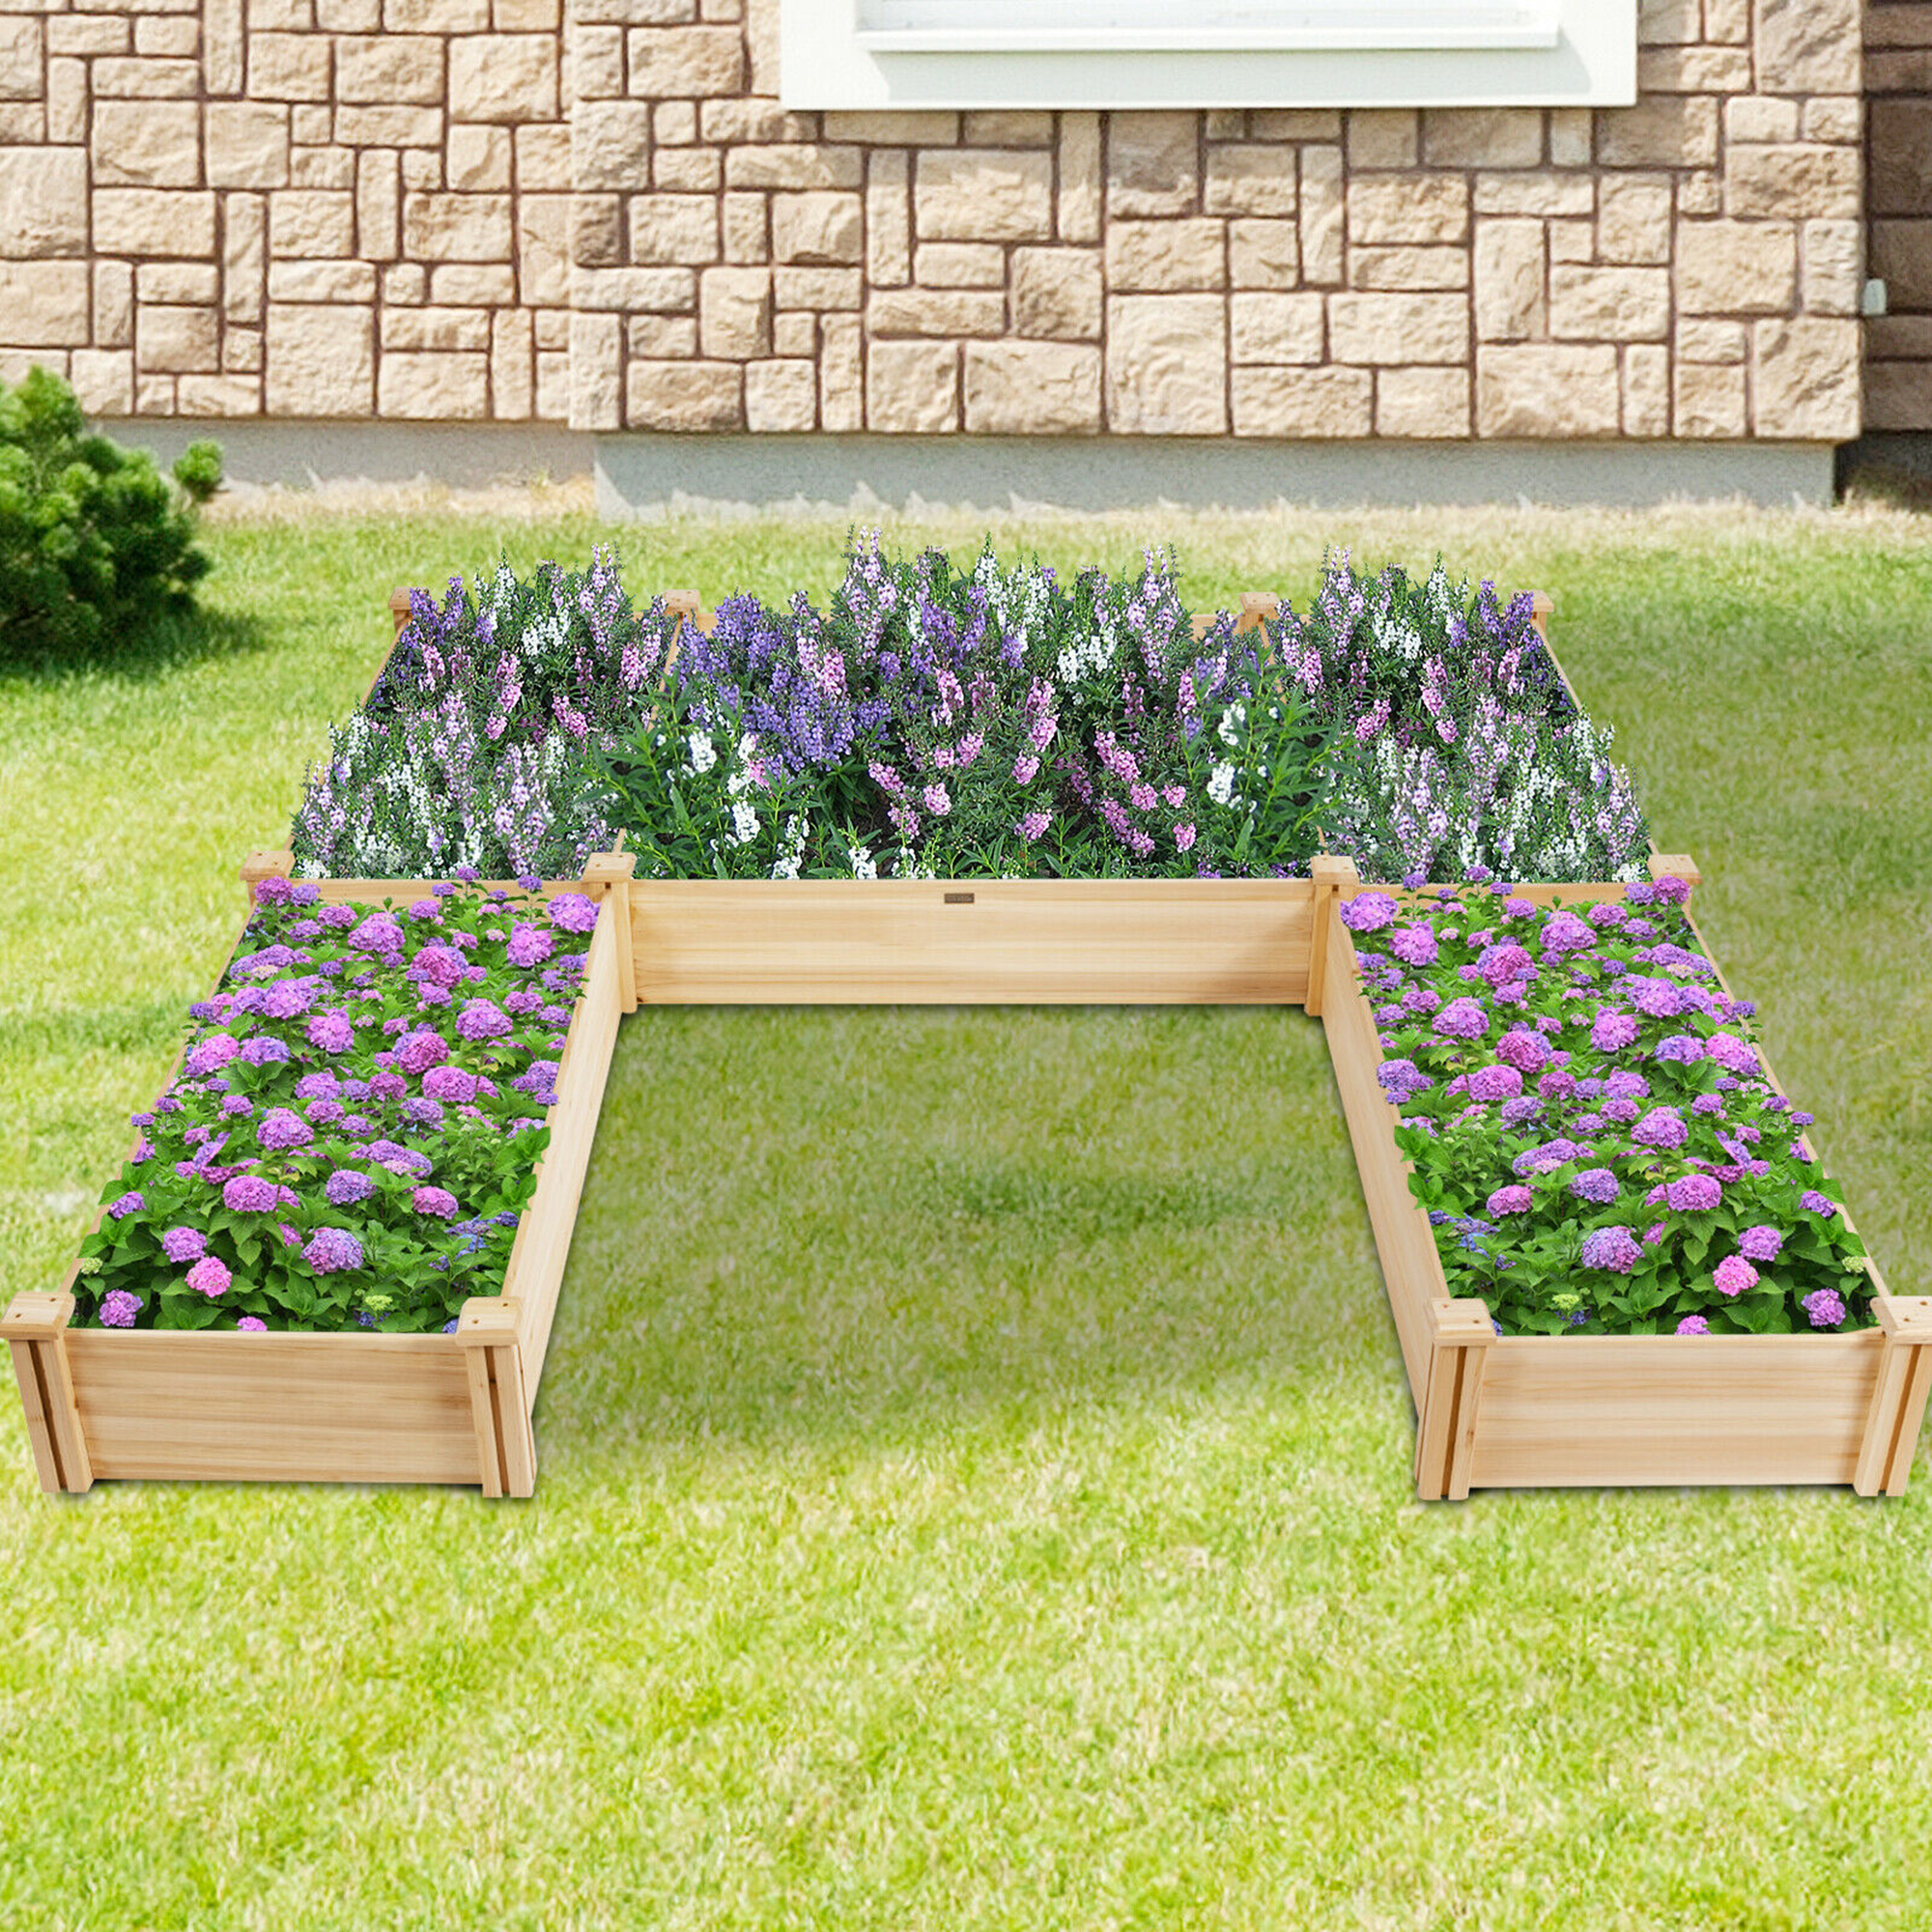 Gymax Raised Garden Bed 92.5x95x11in Wooden Garden Box Planter Container U-Shaped Bed - image 3 of 10